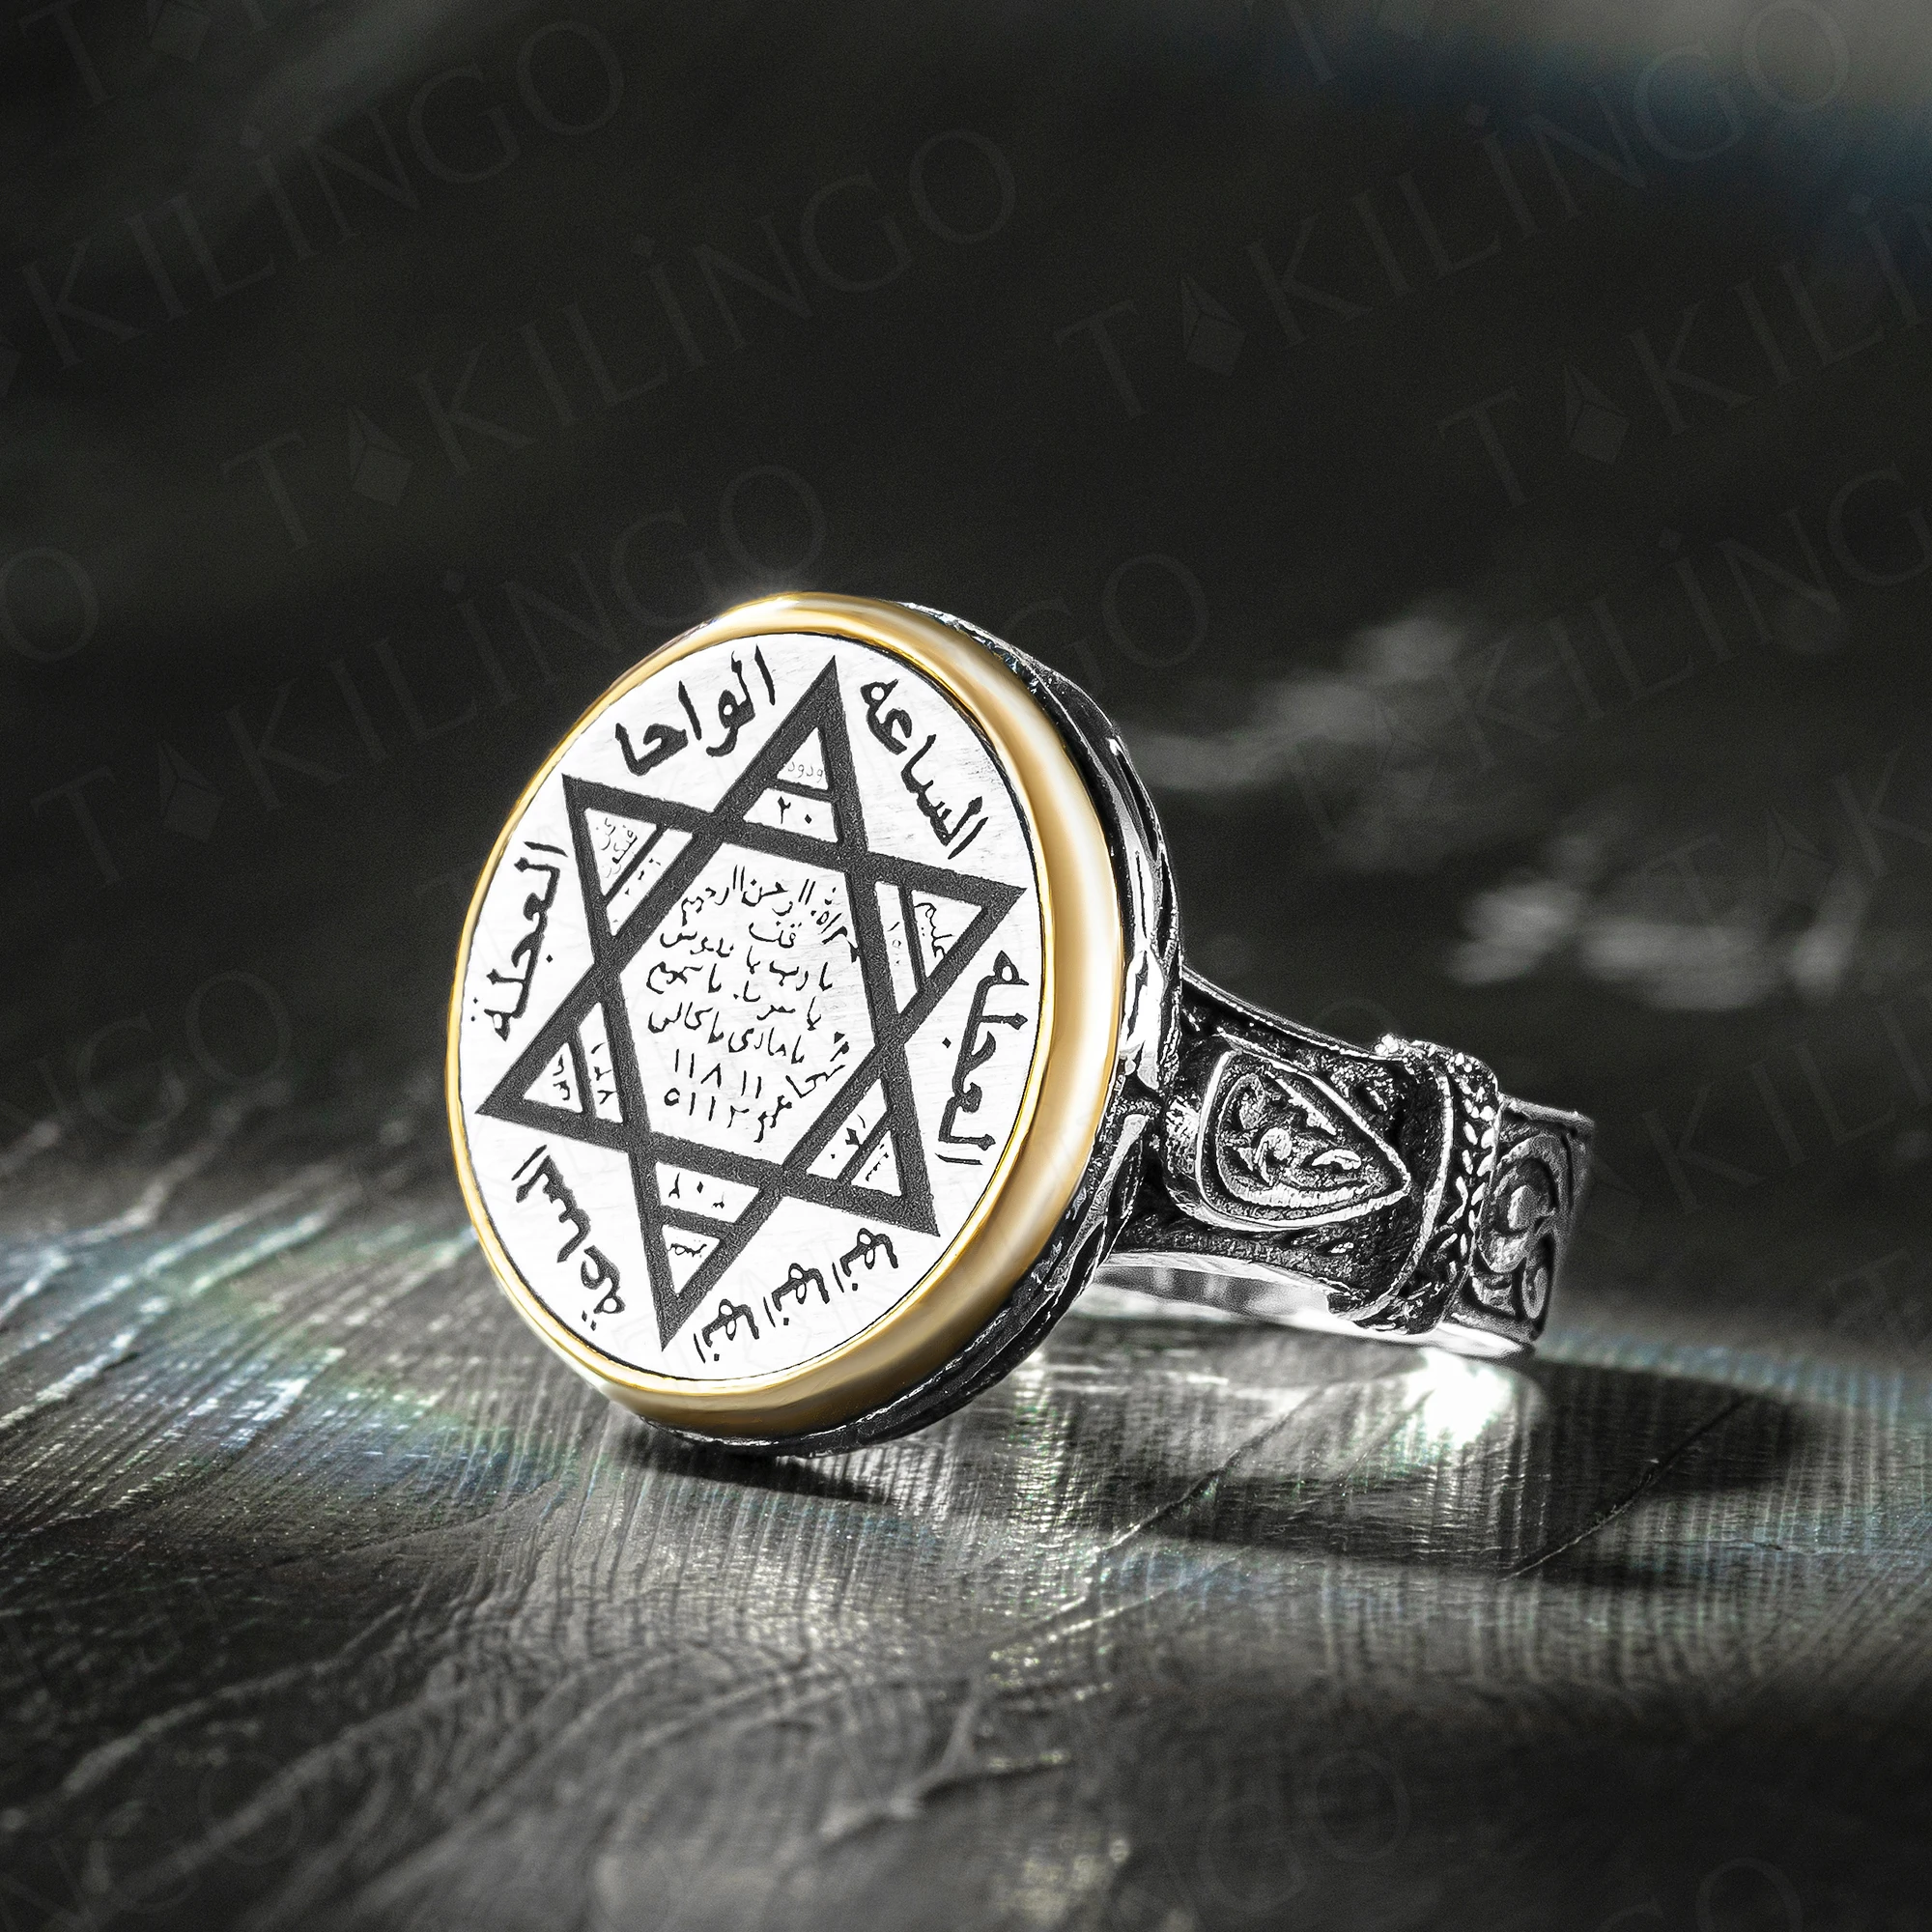 

Elegant Solid 925 Sterling Silver Round Seal Of Solomon Men's Ring Secret David Of Star Turkish Hanmade Silver Jewelry Gift Him